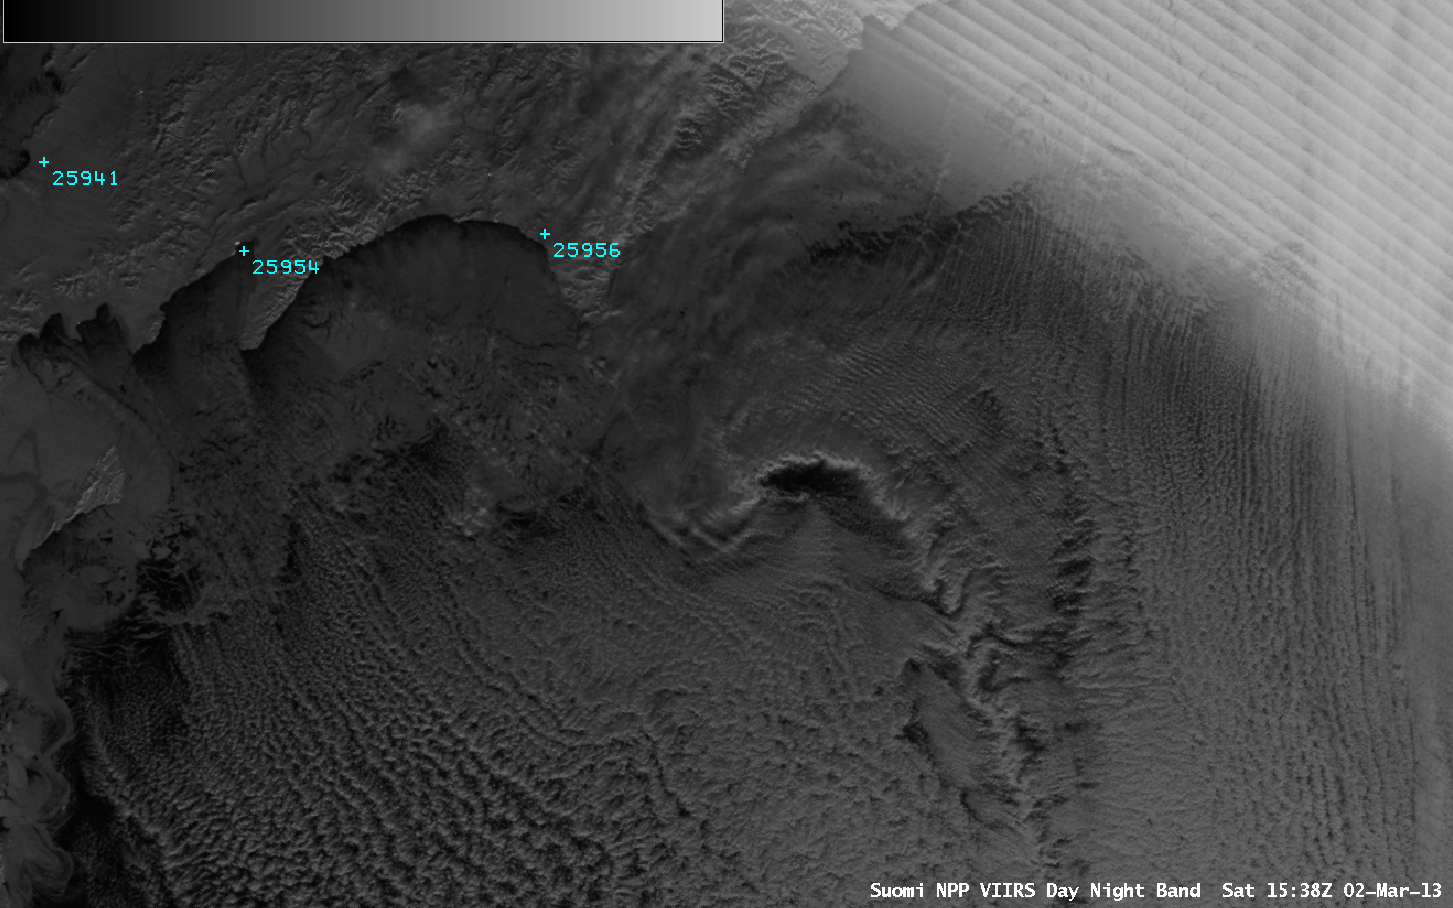 Suomi NPP VIIRS 0.7 Âµm Day/Night Band images